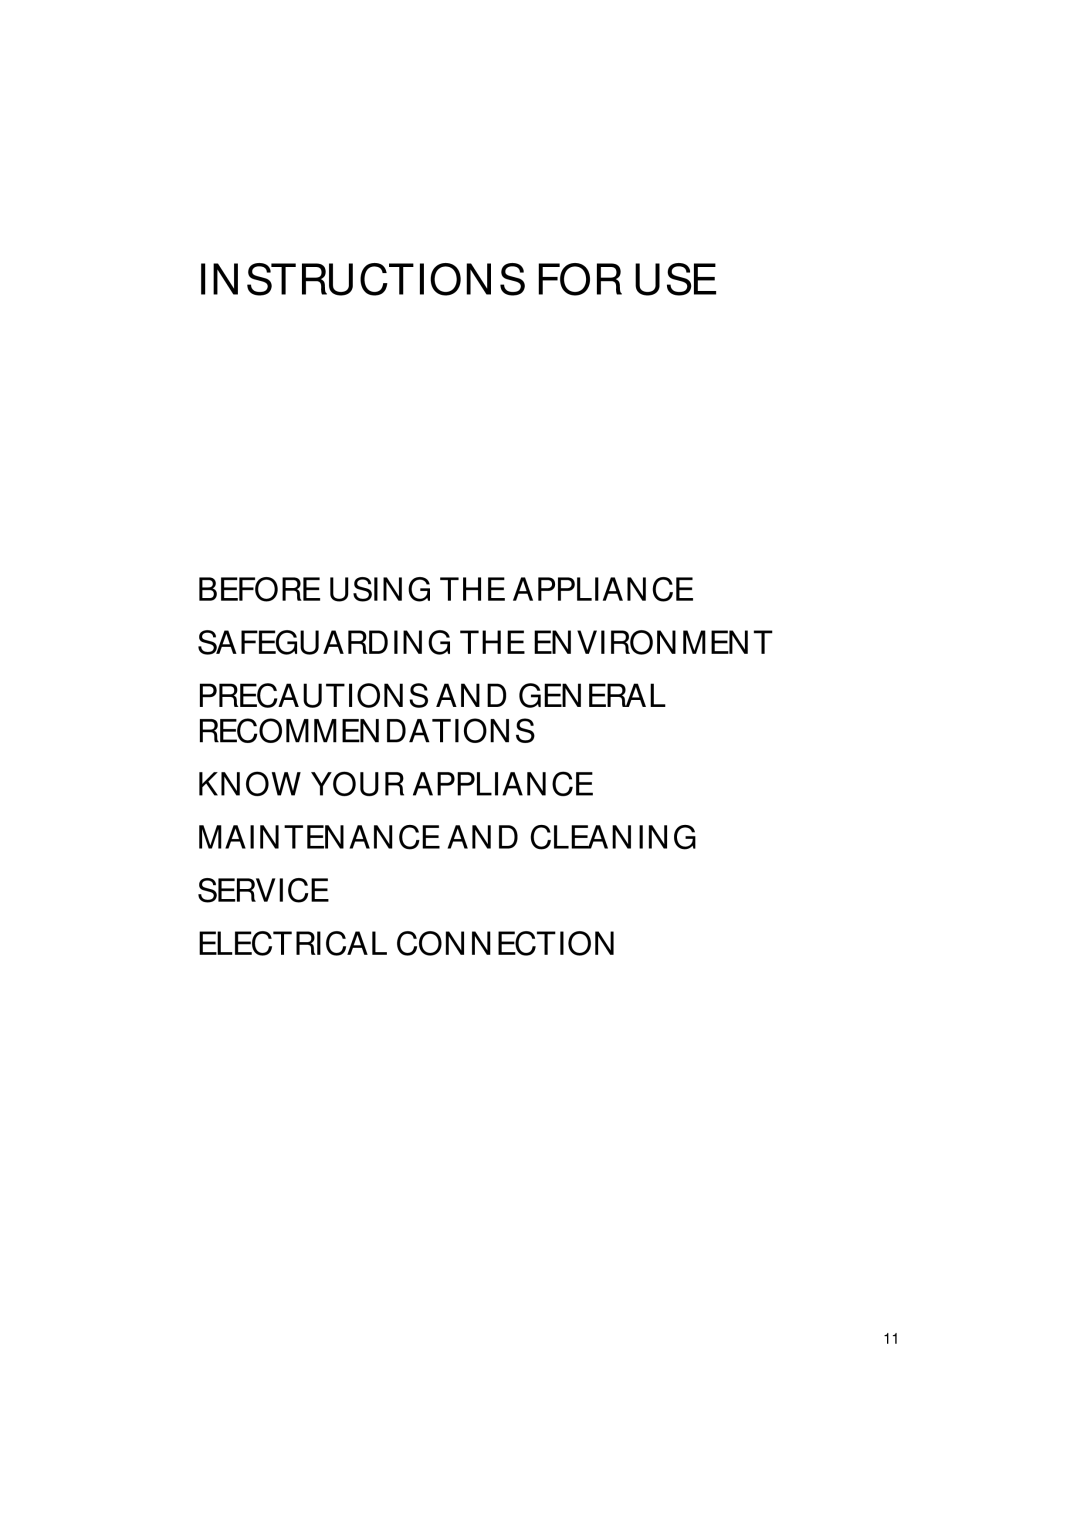 Smeg VR115A manual Precautions And General Recommendations, Electrical Connection, Instructions For Use 